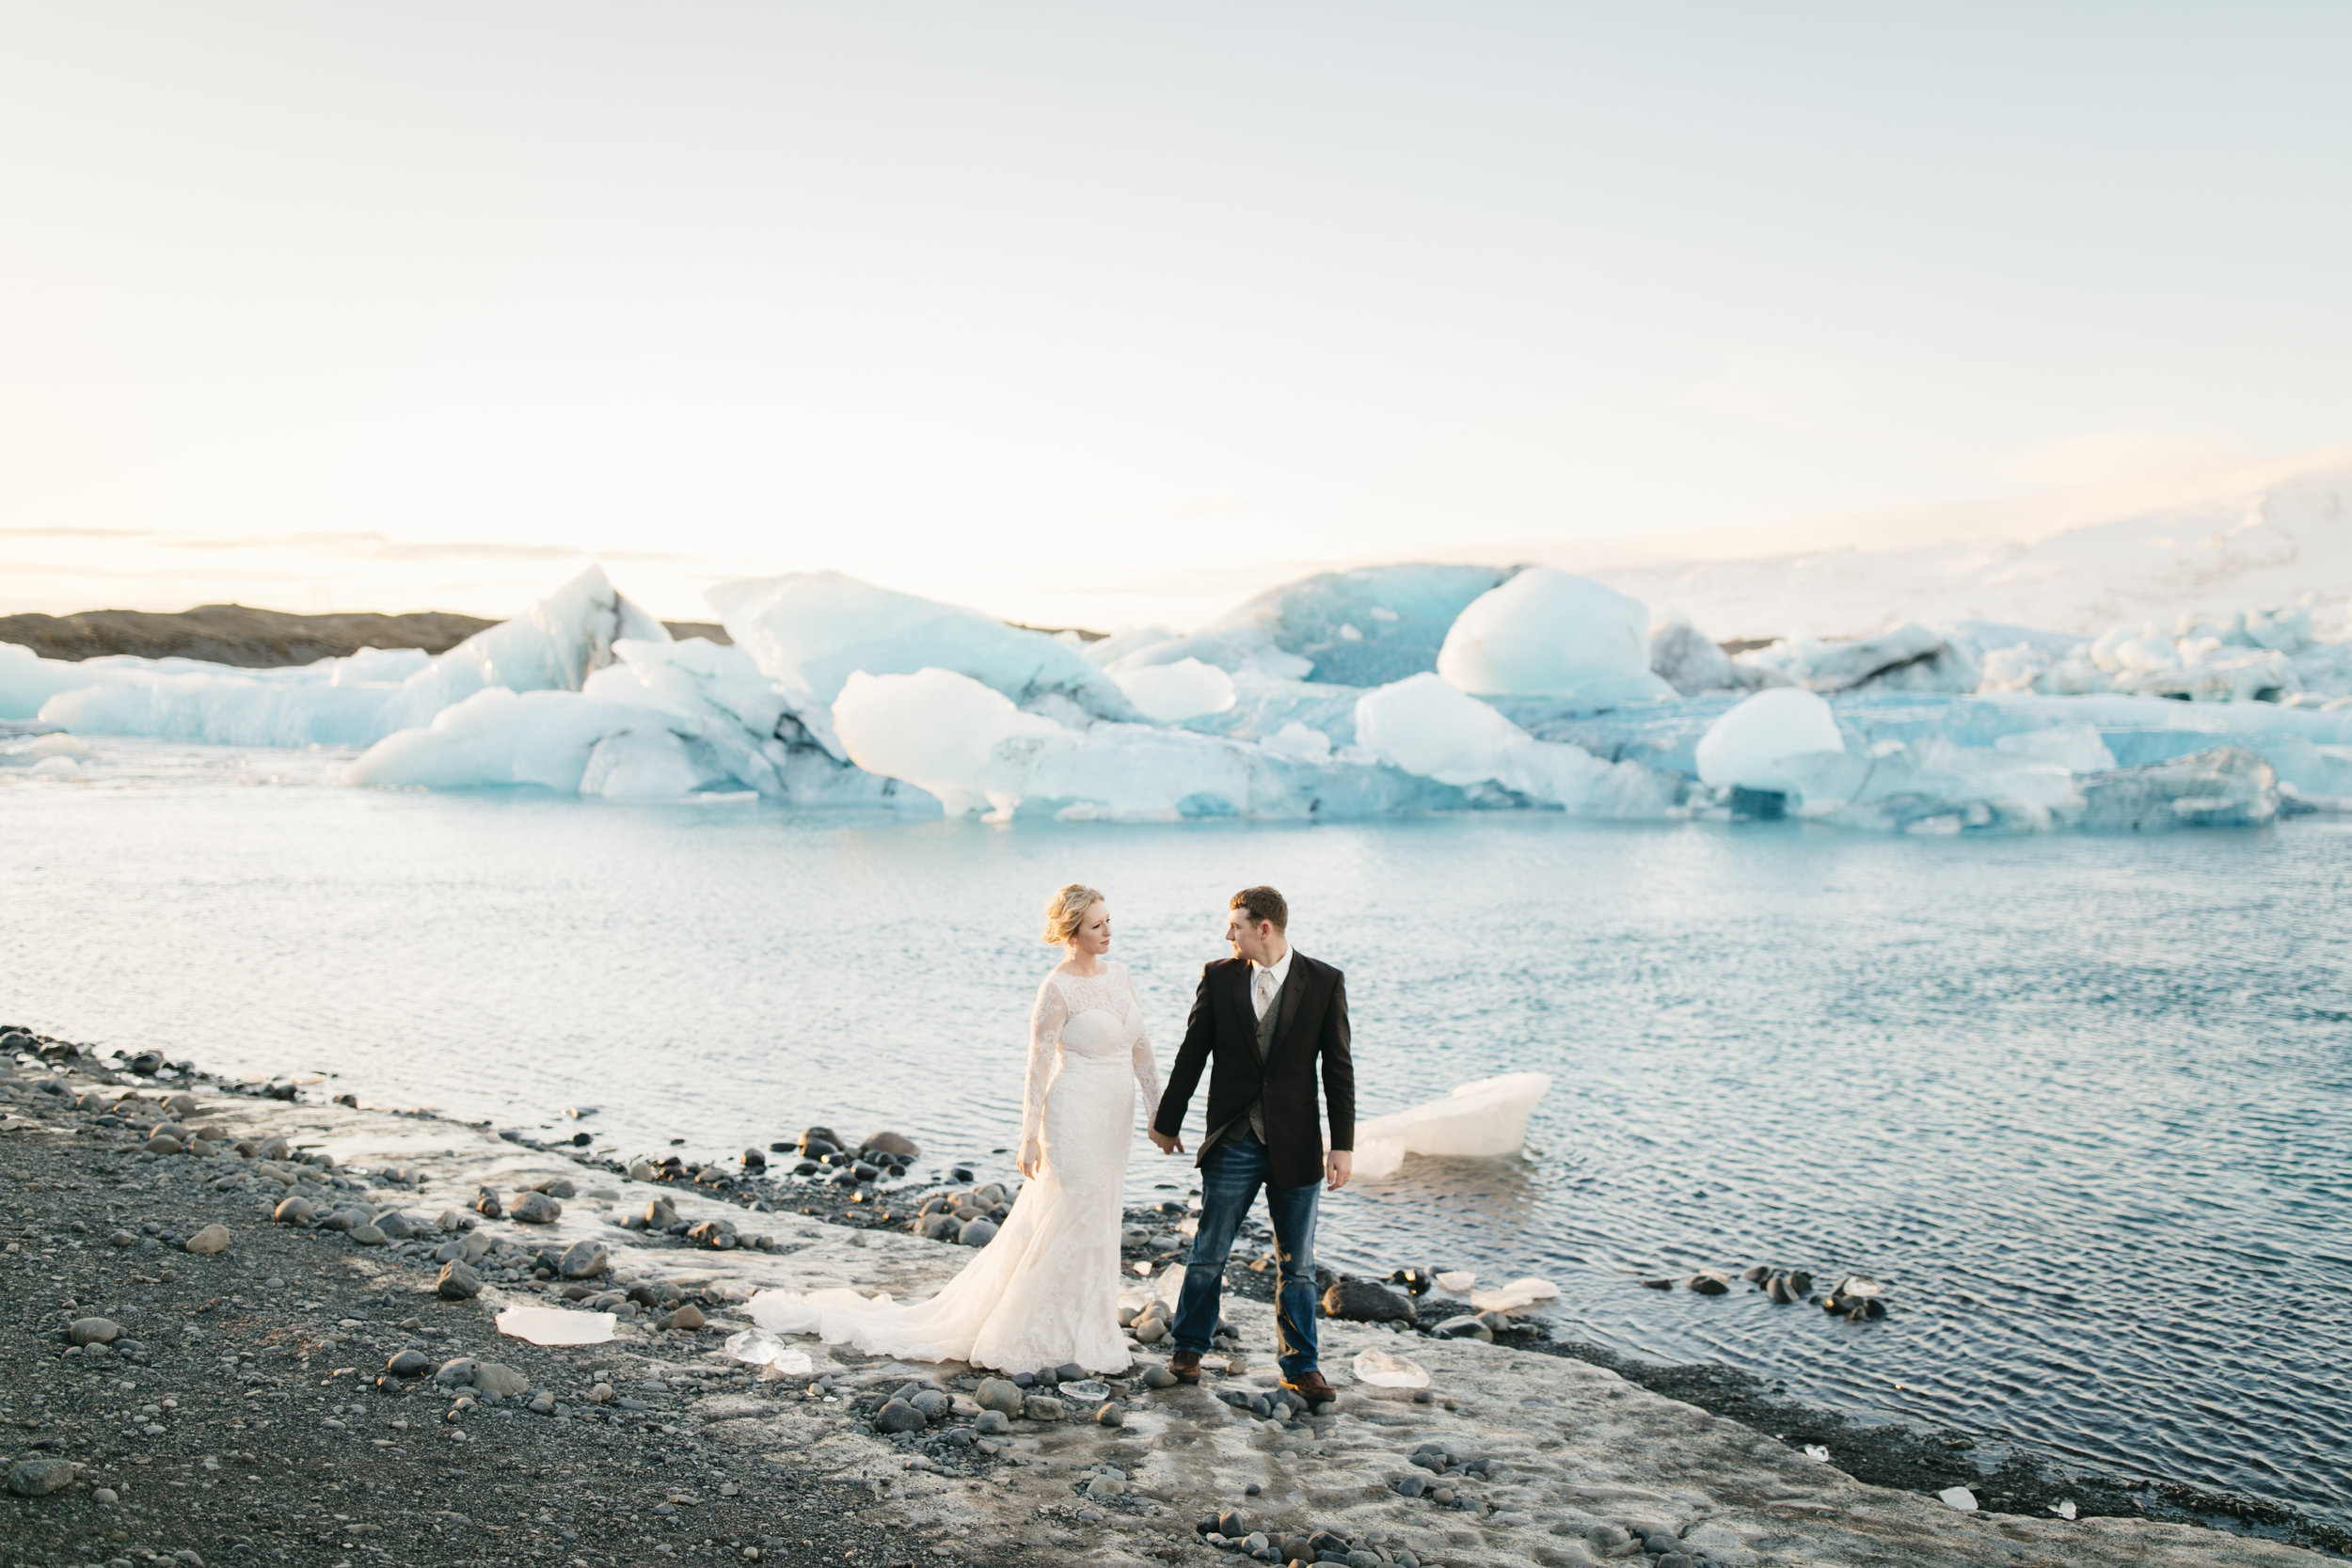 A happy couple walks along beach beside glaciers during Iceland Elopement Photography session by Colby and Jess.